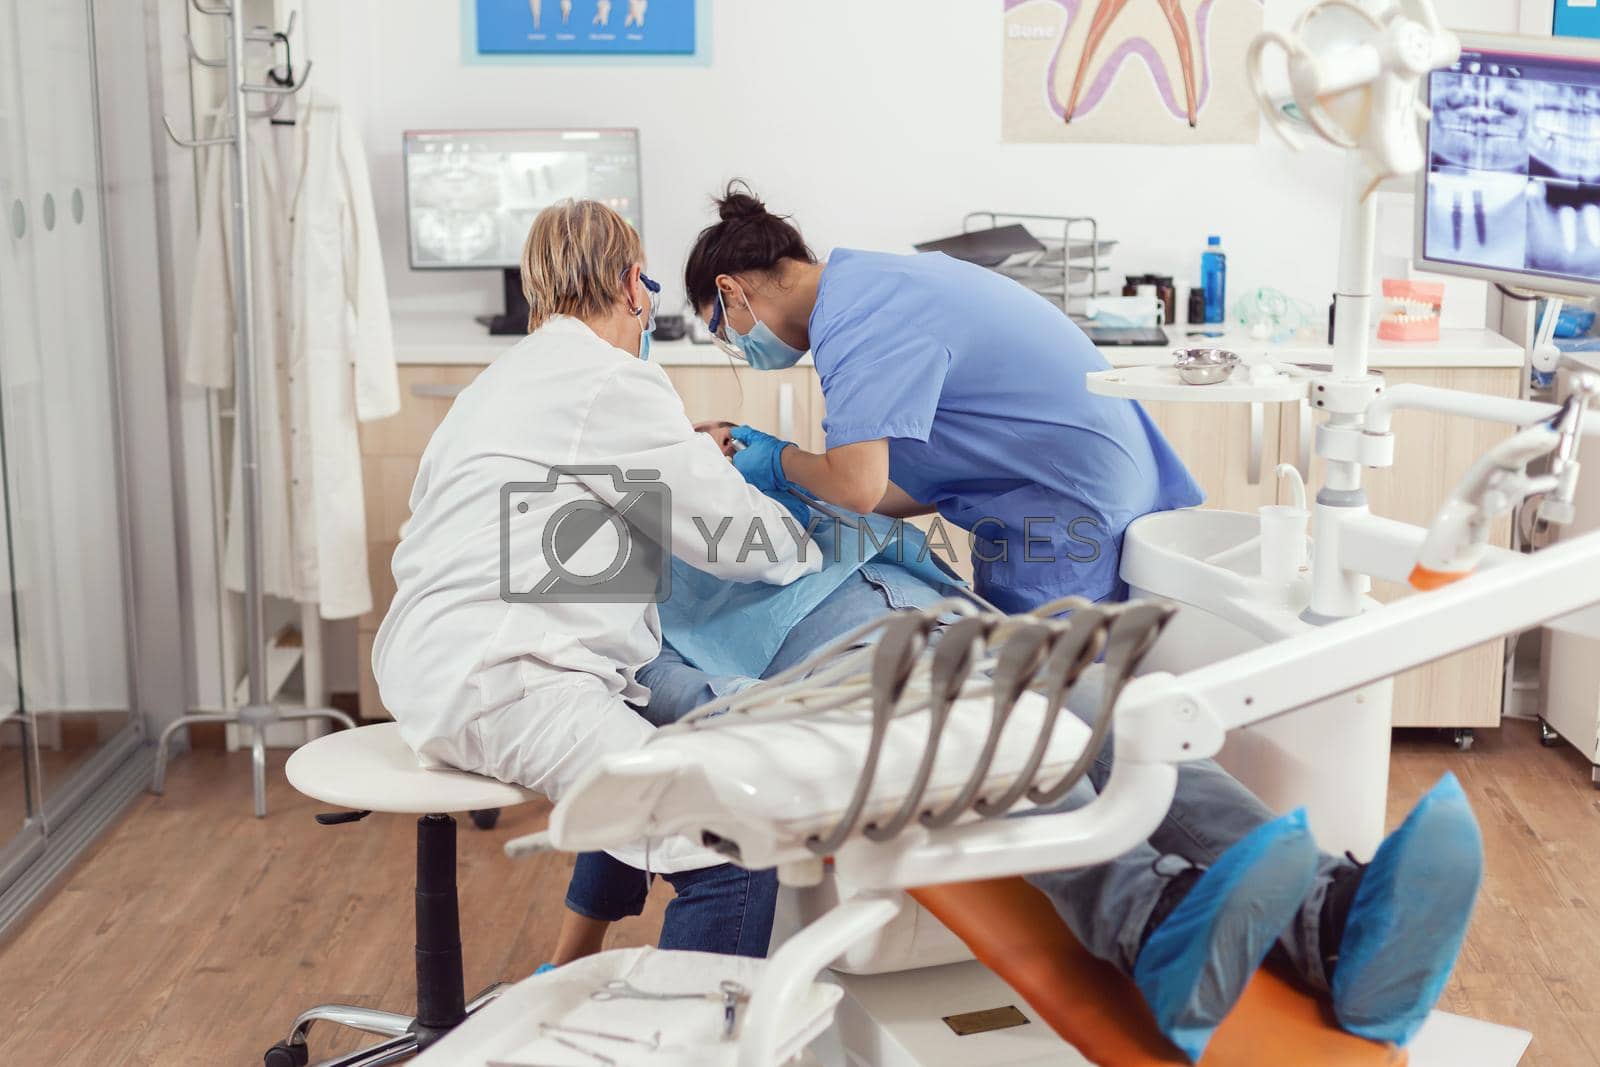 Sick man sitting on dental chair during medical examination while senior dentist woman doing oral surgery in dentistry office. Hospital team examining patient toothache preparing tooth treatment